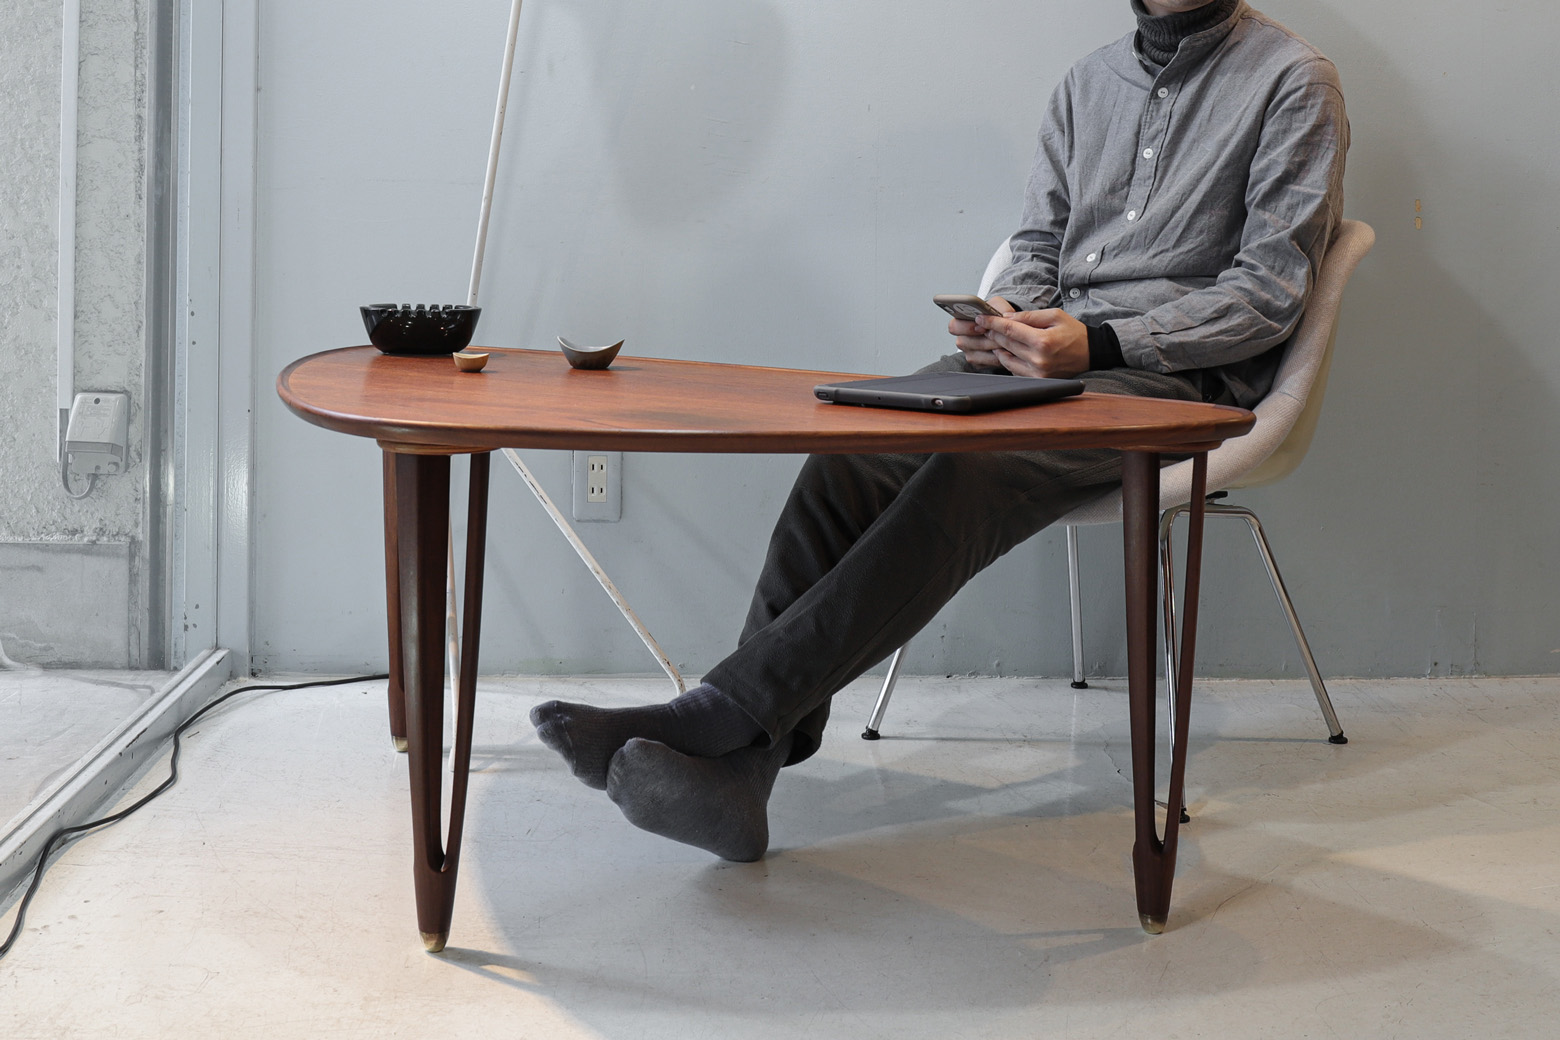 B.C.Møbler Tripod Coffee Table/デンマーク ヴィンテージ コーヒーテーブル 北欧家具 チーク材